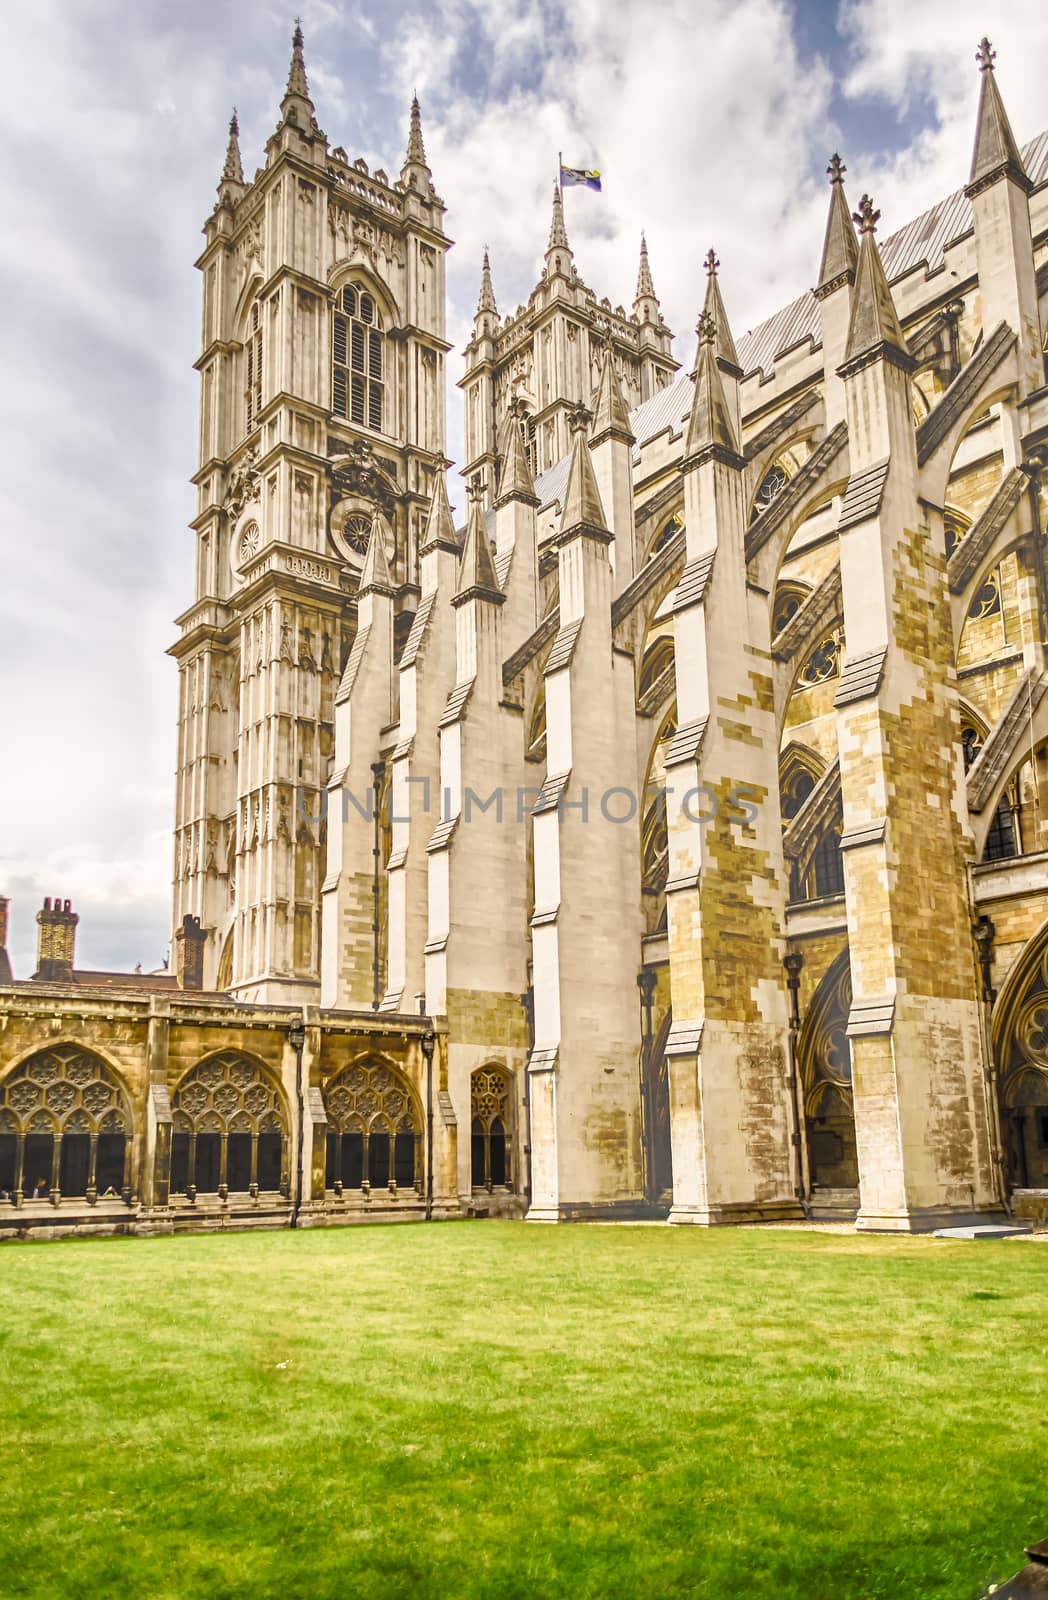 Cloister of the Westminster Abbey, London, UK